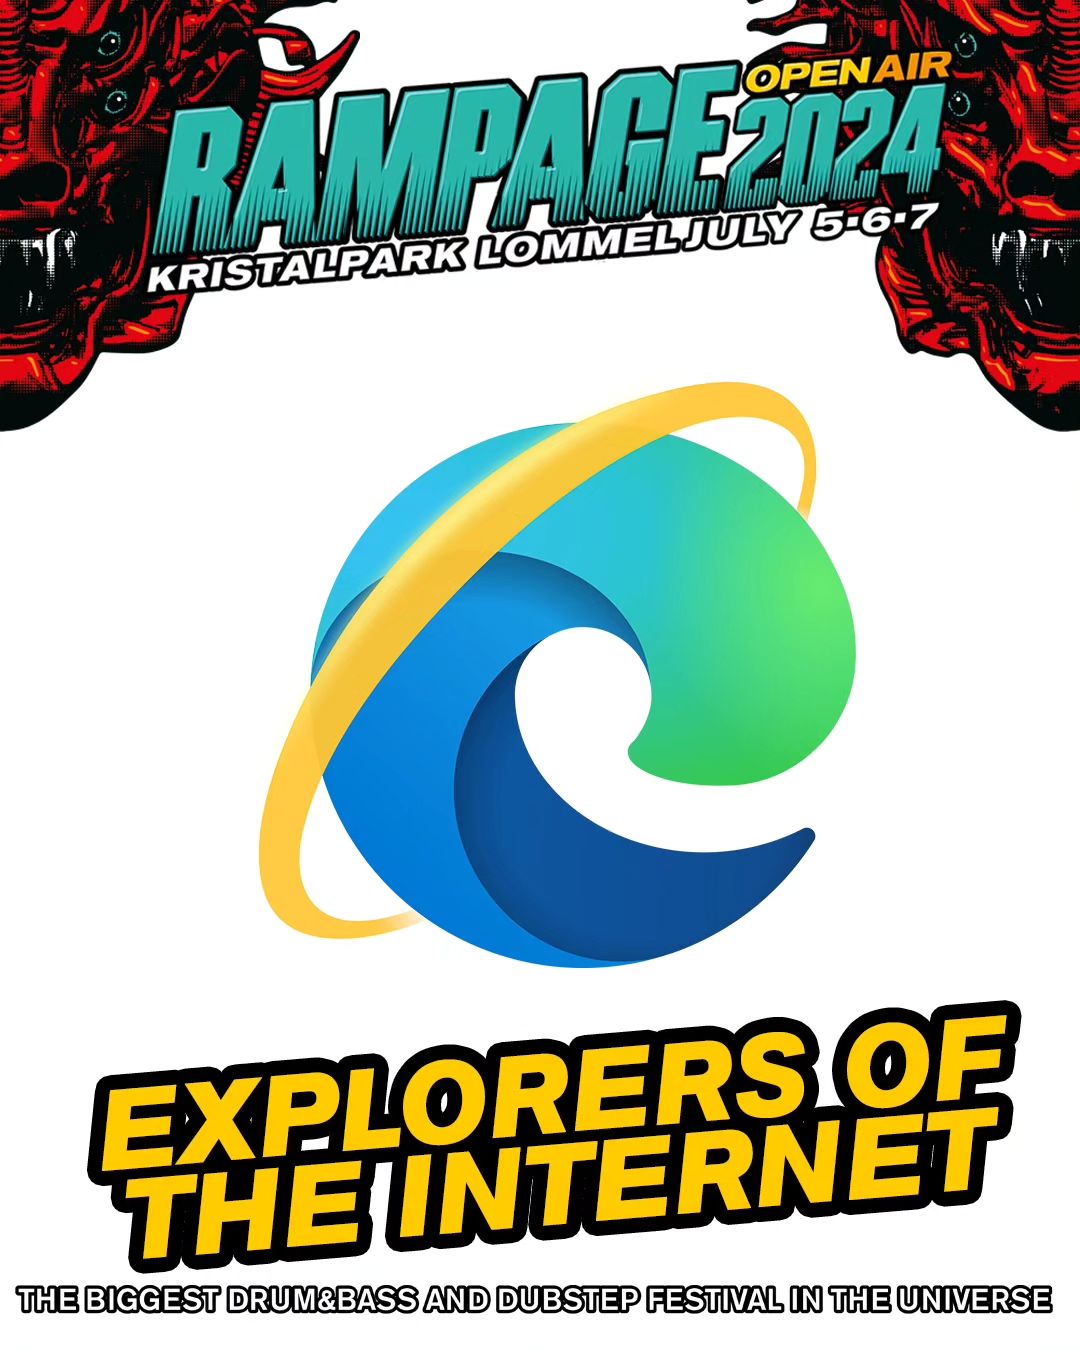 Explorers of the Internet at Rampage Open Air 2024